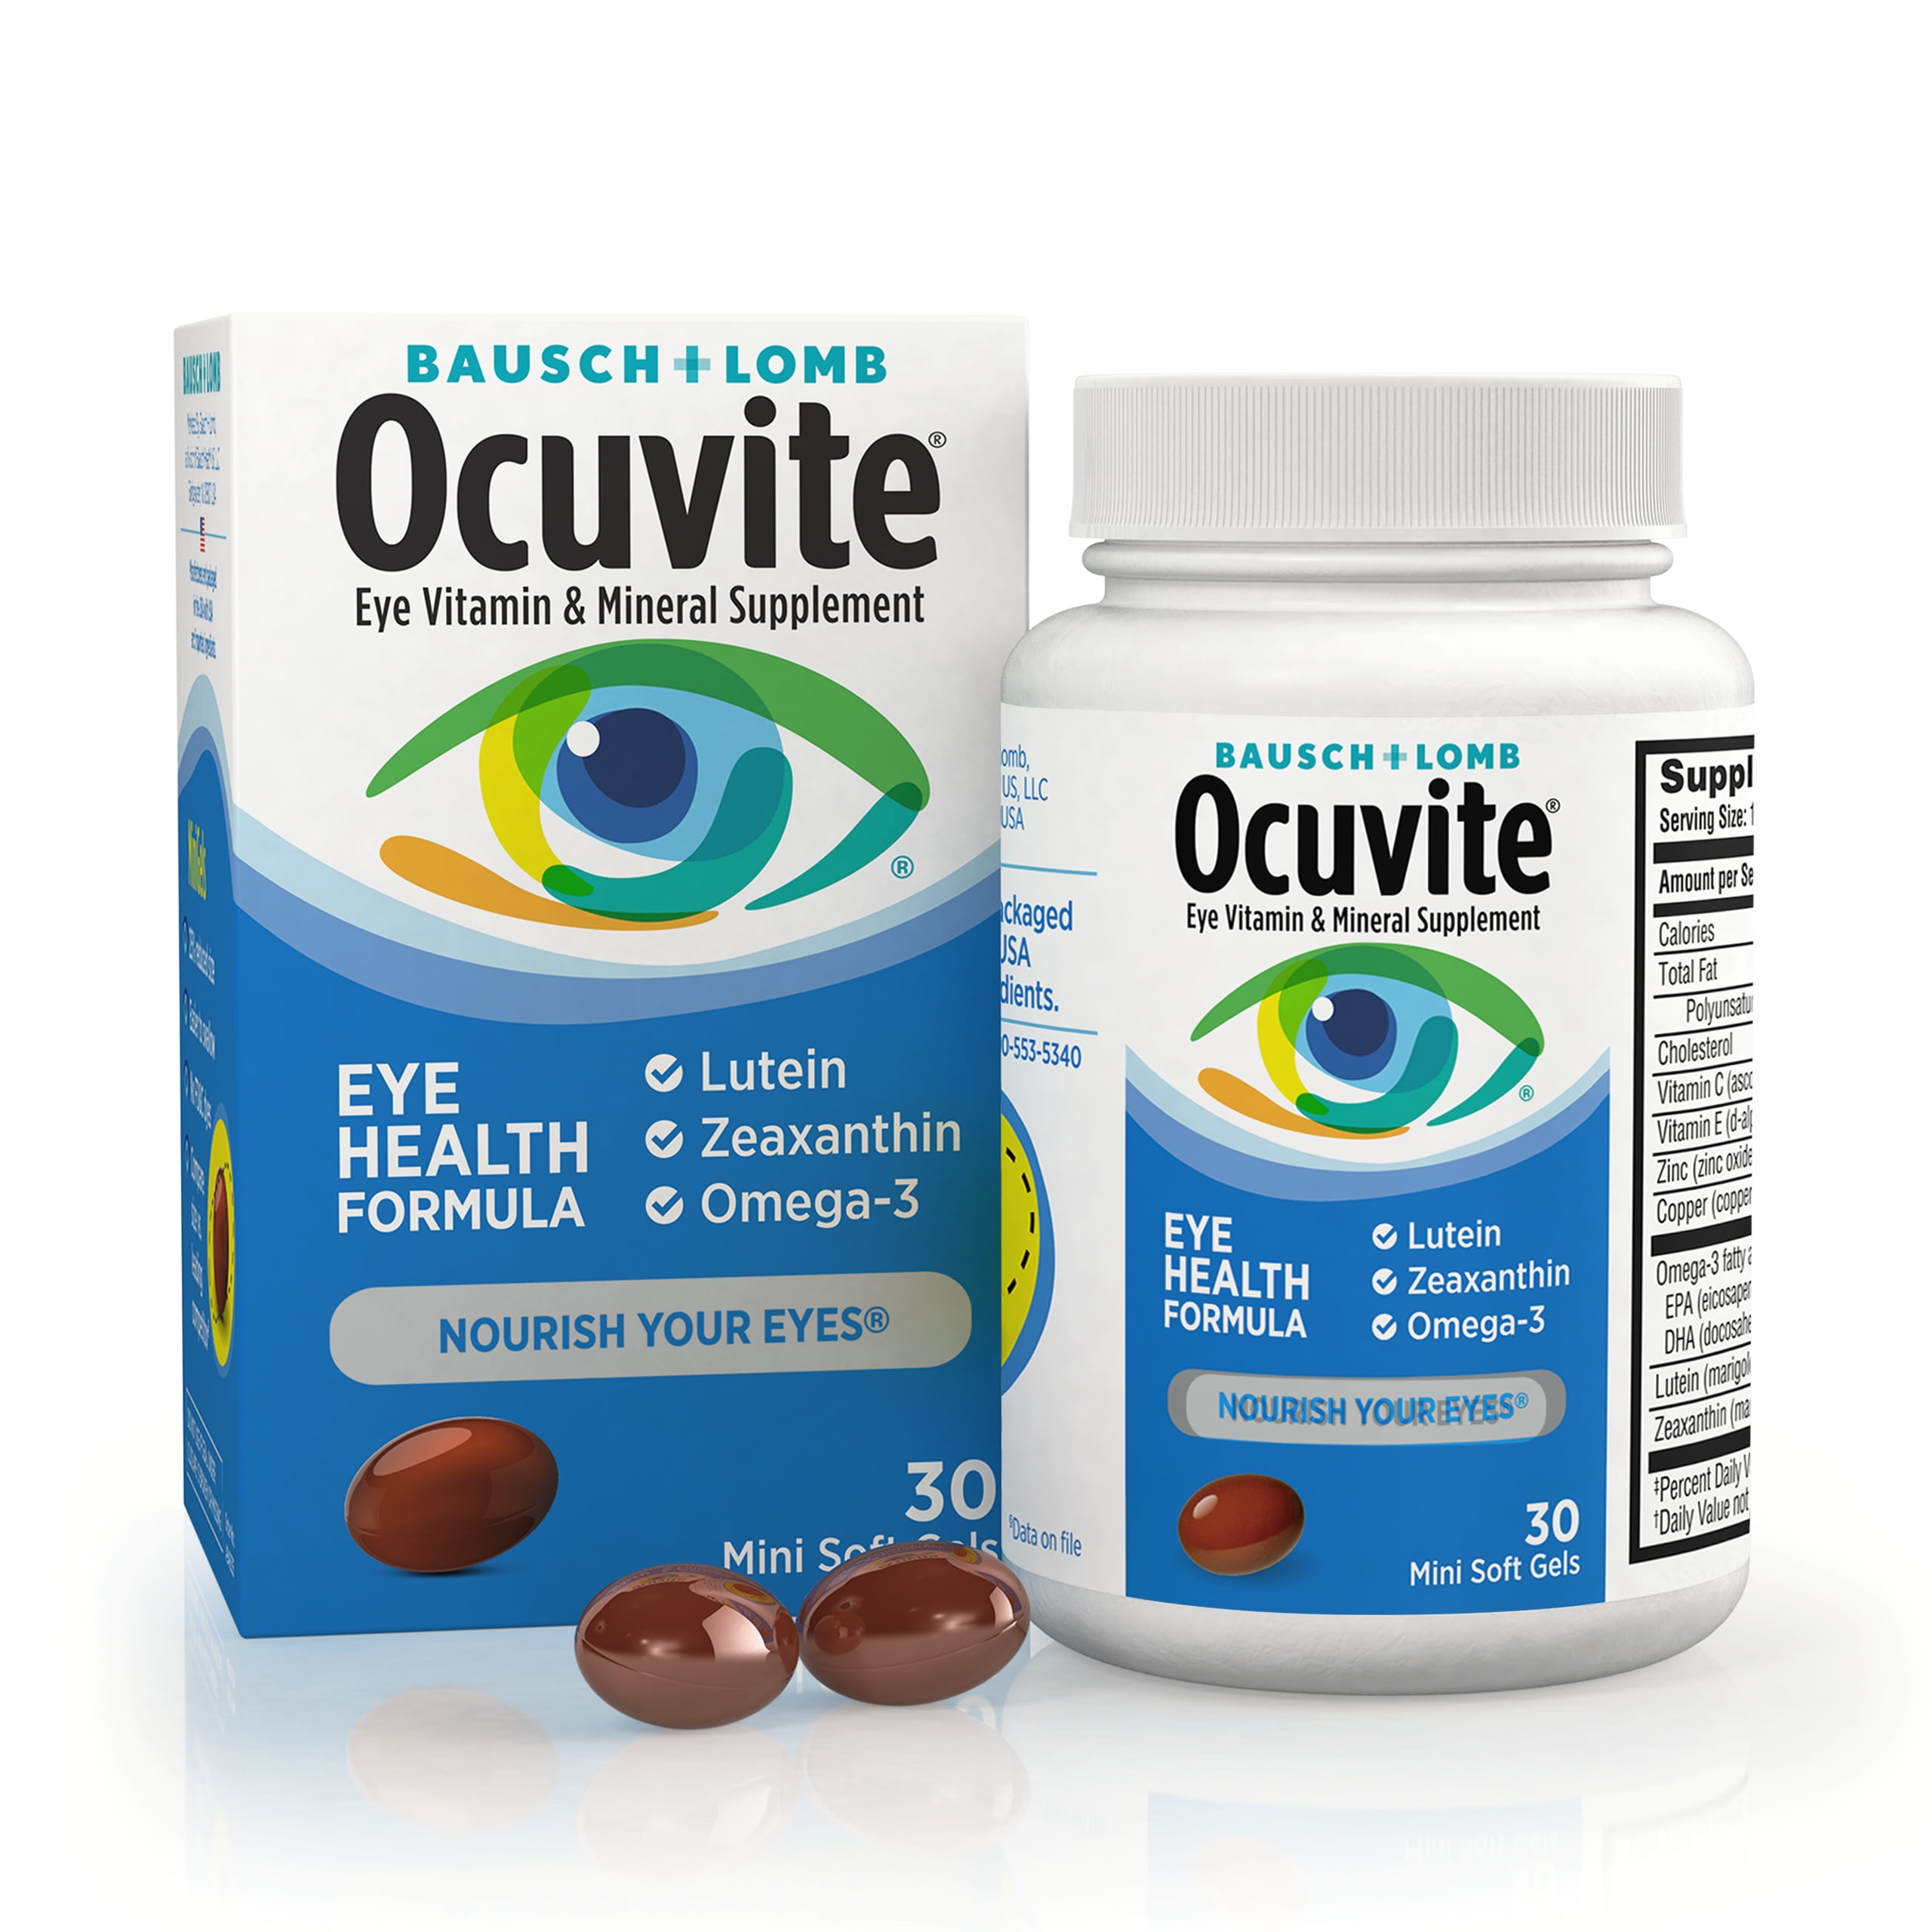 Ocuvite®  Eye Health Formula Eye Vitamin & Mineral Supplement with Lutein, Zeaxanthin and Omega-3 –from Bausch + Lomb, 30 Soft Gels